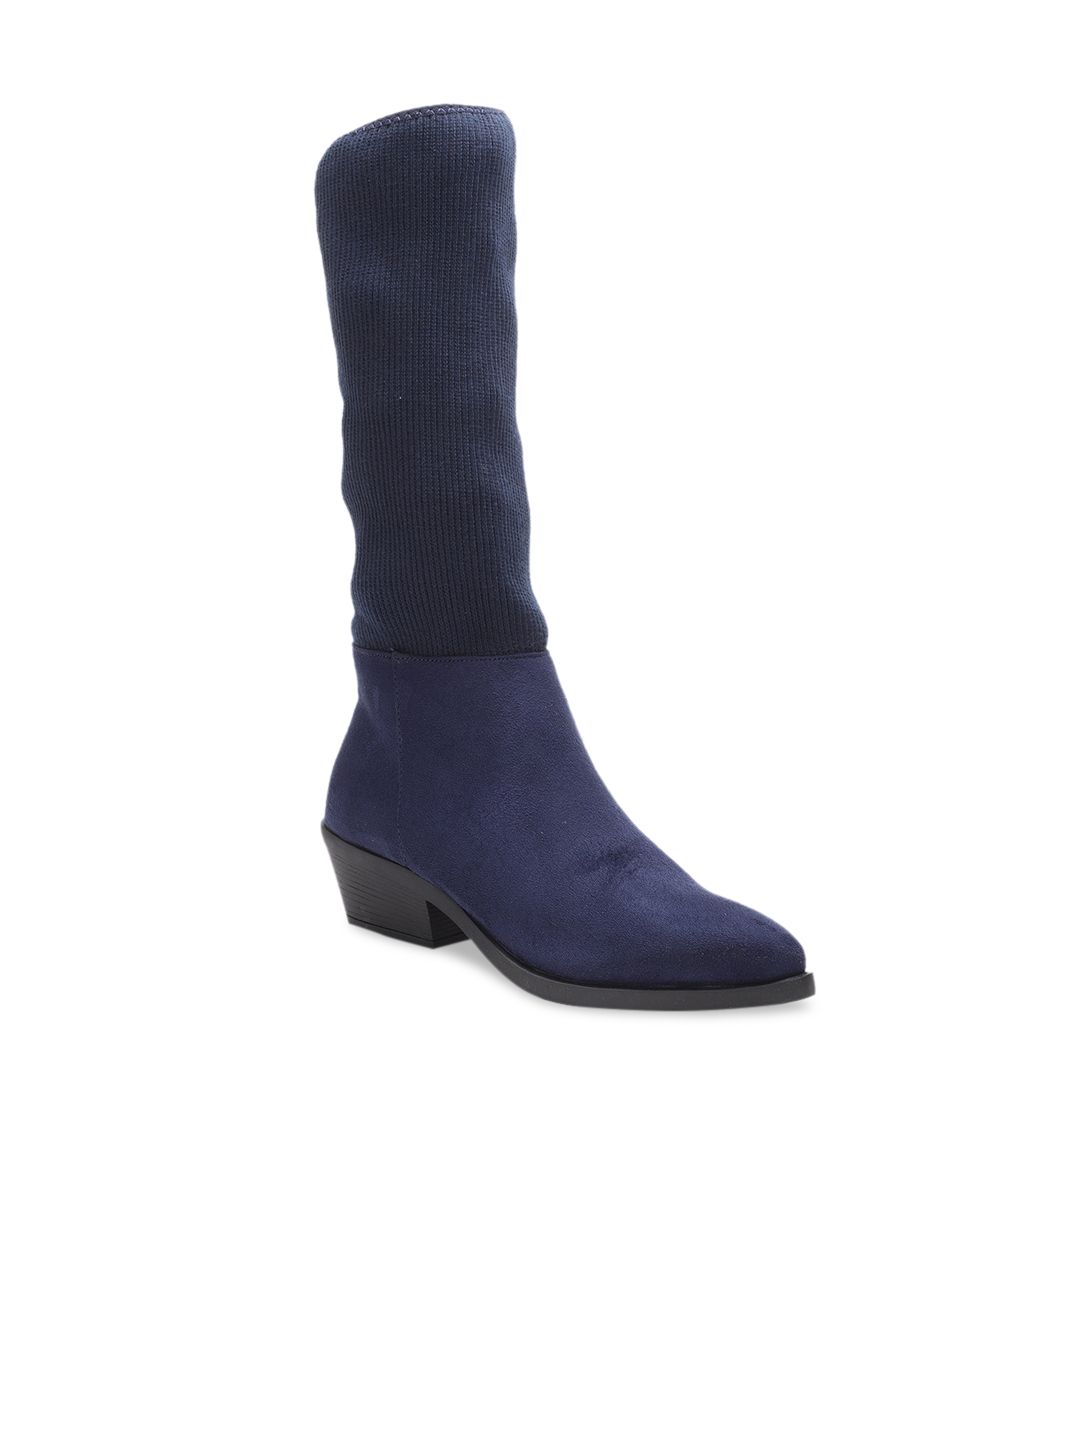 Bruno Manetti Women Navy Blue Solid Suede Heeled Boots Price in India